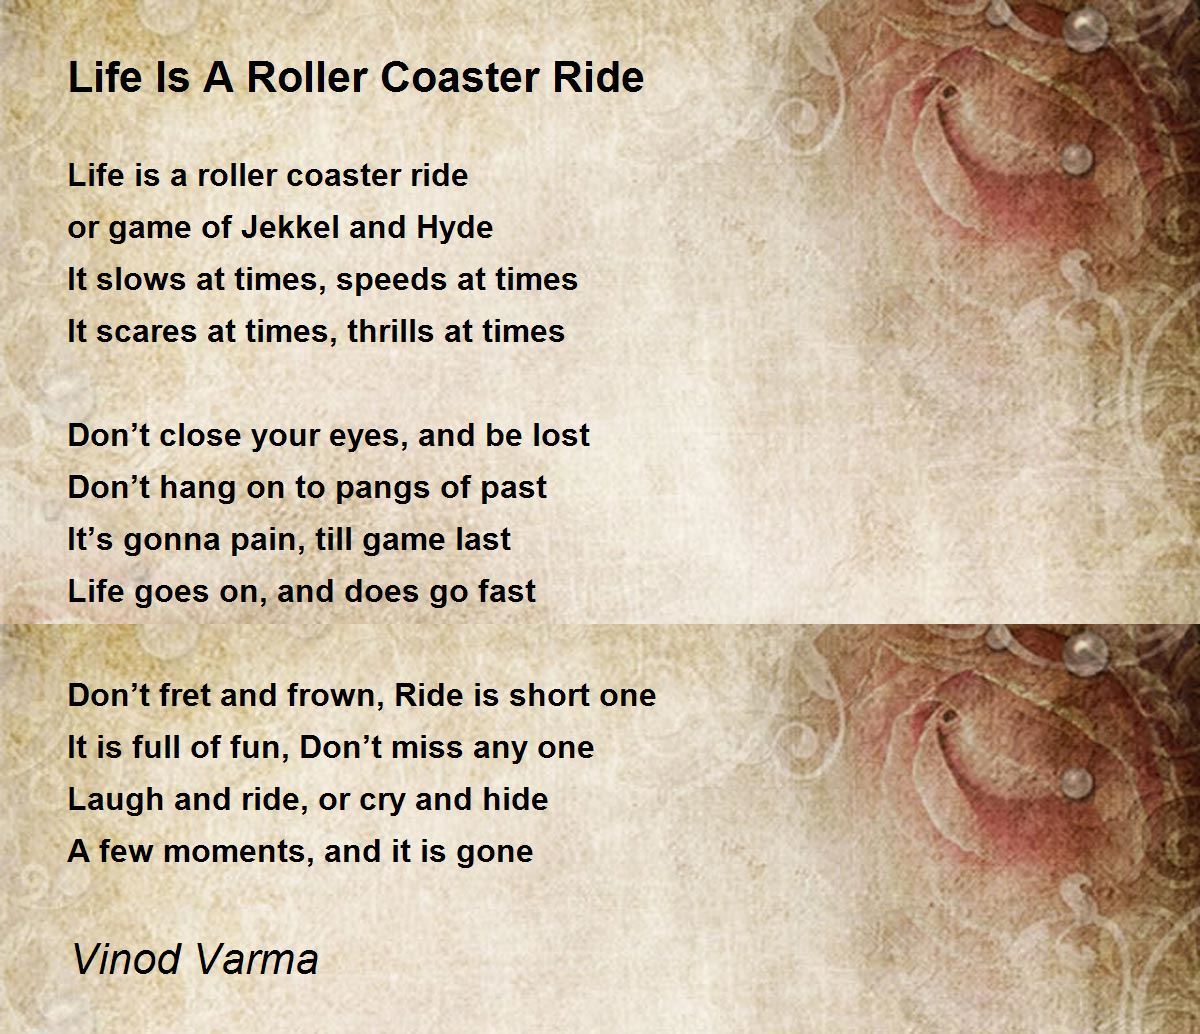 The rollercoaster ride of life